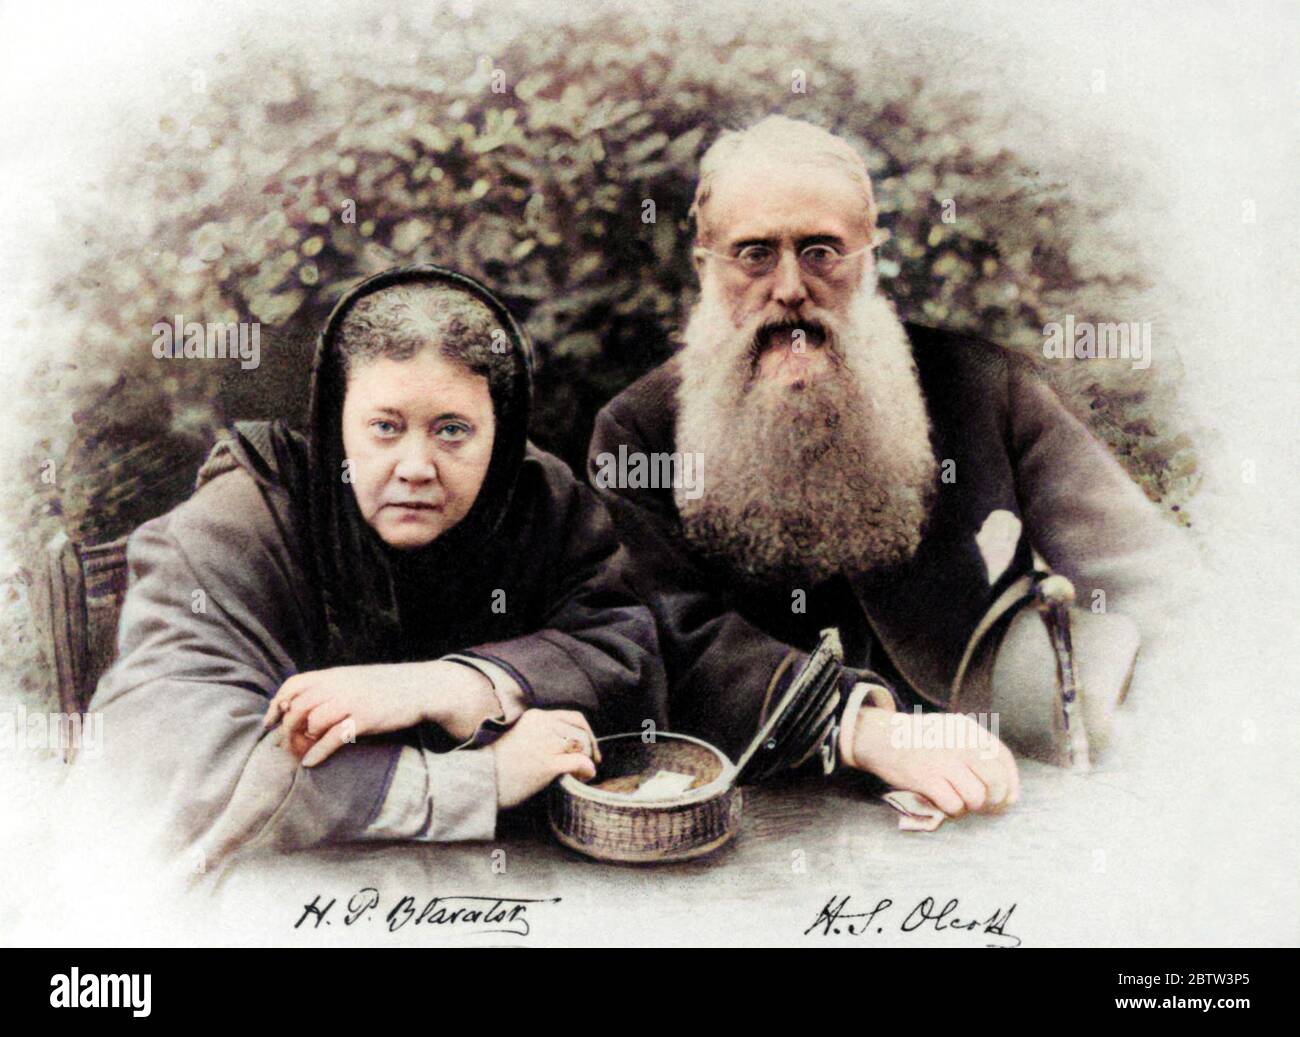 1880 ca, USA : The russian-born Madame Helena Petrovna BLAVATSKY von Hahn ( 1831 - 1891 ) with close friend journalist colonel Henry Steel OLCOTT ( 1832 - 1907 ). Celebrated woman Theosopyst , phylosopher , occultist, mystic , spiritualist traveller and writer . Founder with Olcott of THEOSOPHICAL SOCIETY in 1875 . In this photo with the ring of HIGHT PRIESTESS with symbol of Theosophy: ring with green stoneflecked with veins of blood red engraved with interlaced triangles in a circle, with in dian motto Sat ( Life ), was gived to Blavatsky by her Indian teacher Damodar Mavalankar in 1880  . P Stock Photo